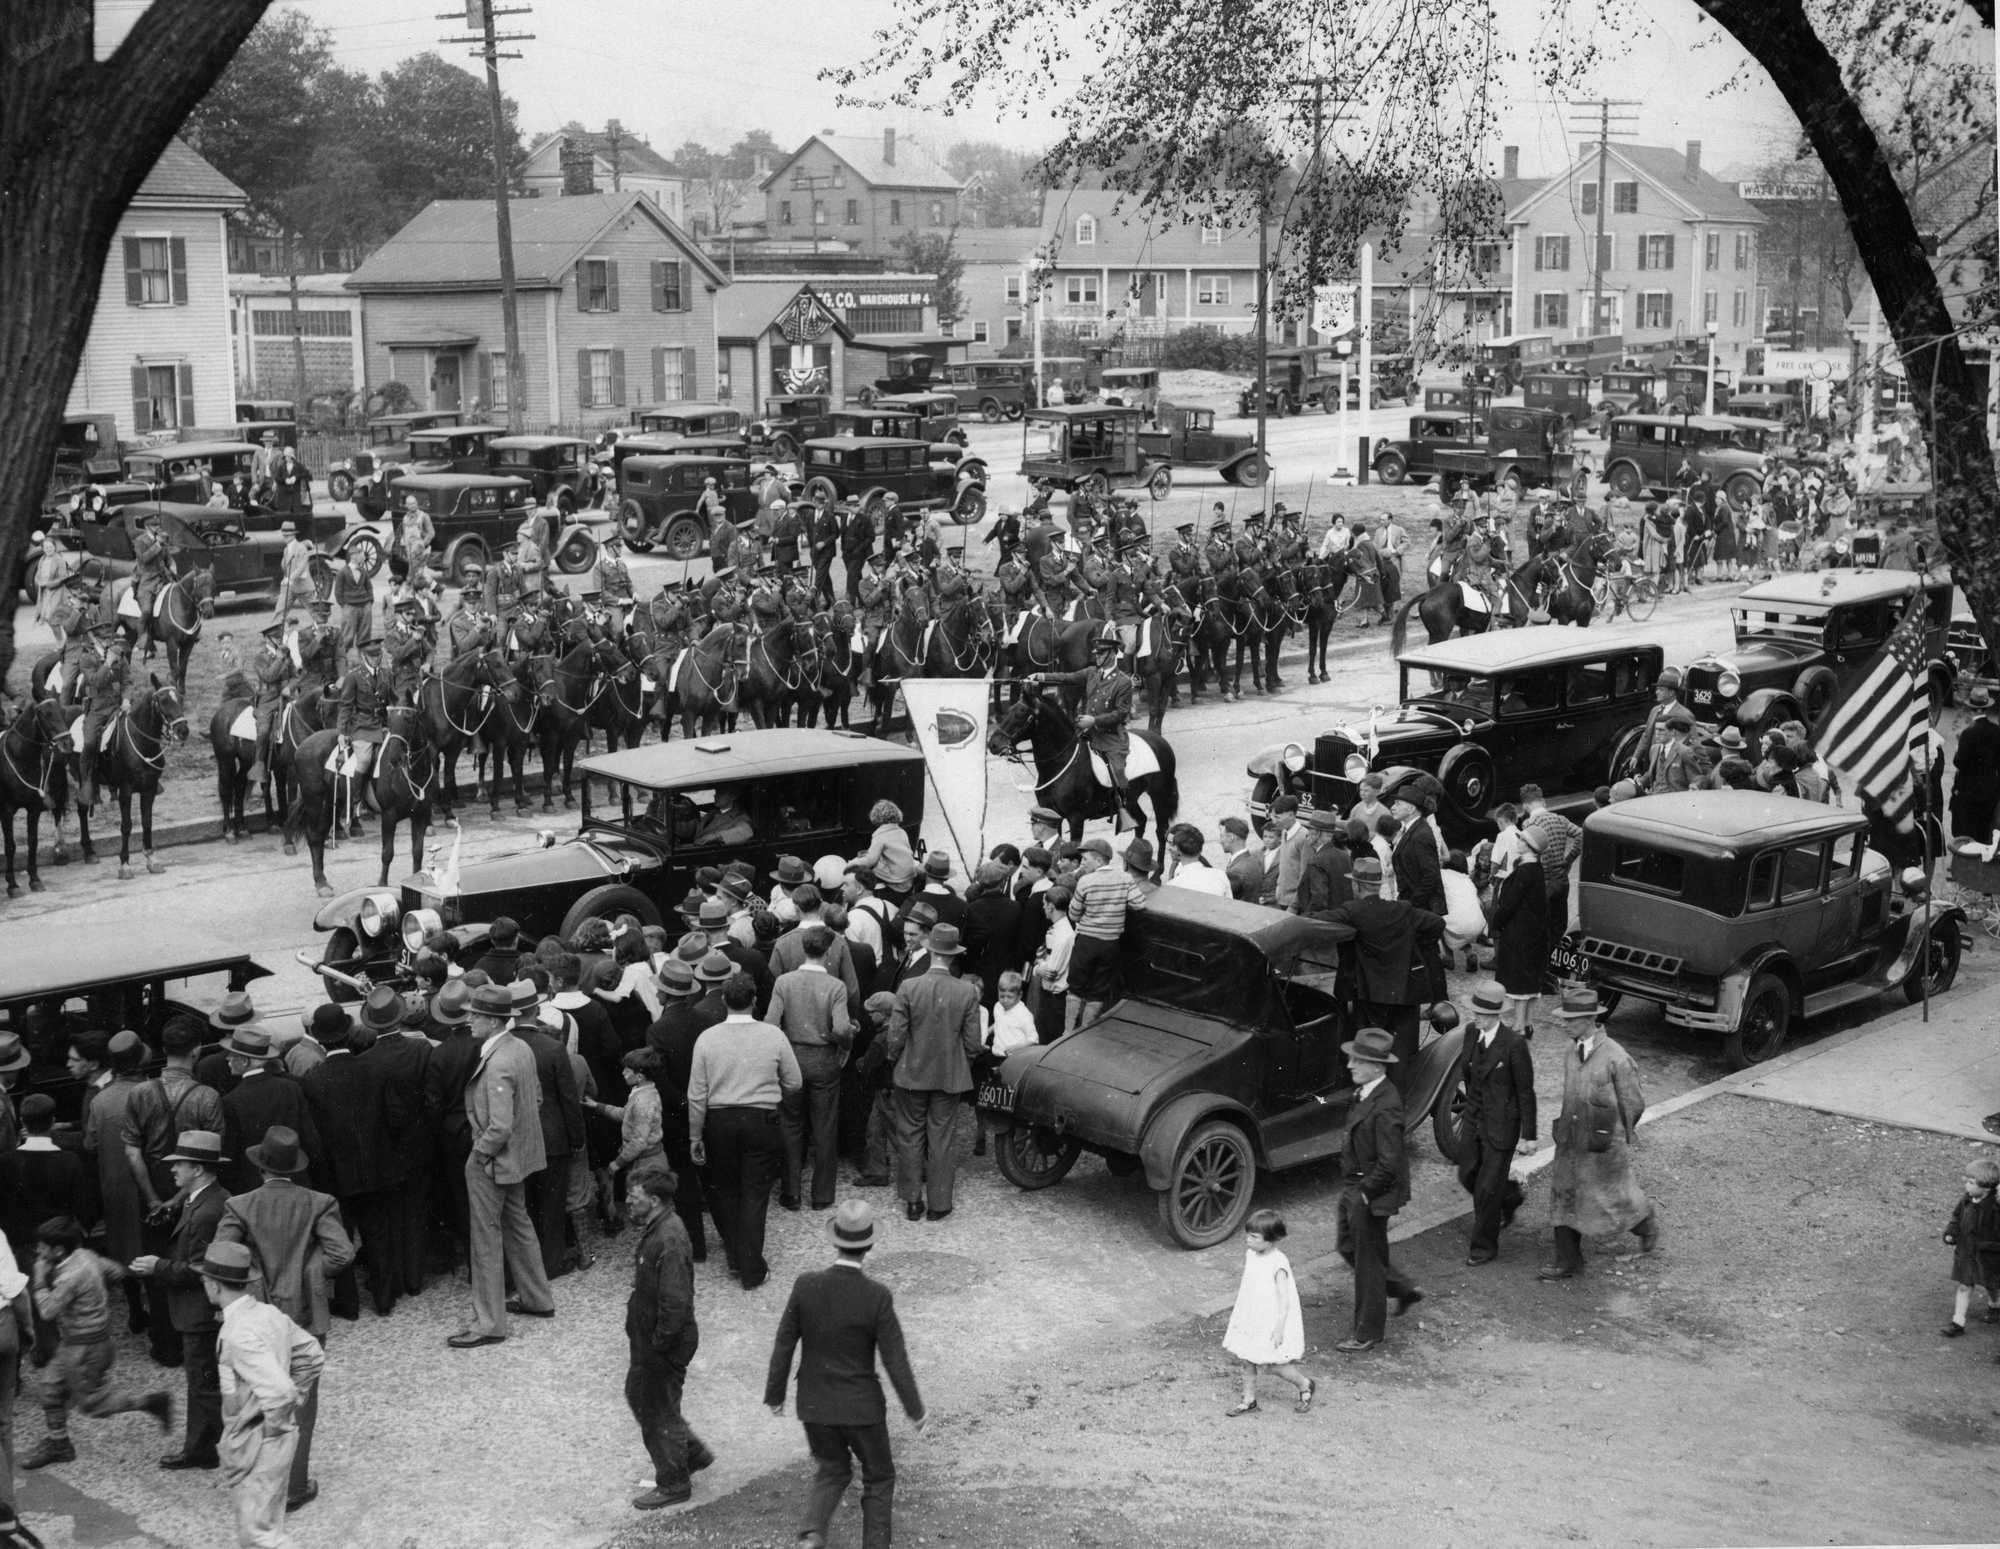 In May 1930, Massachusetts Governor Frank G. Allen, former president Calvin Coolidge, and members of the state Legislature were greeted by the 110th Cavalry at the junction of North Beacon and Arsenal streets during the Watertown Tercentenary Celebration.